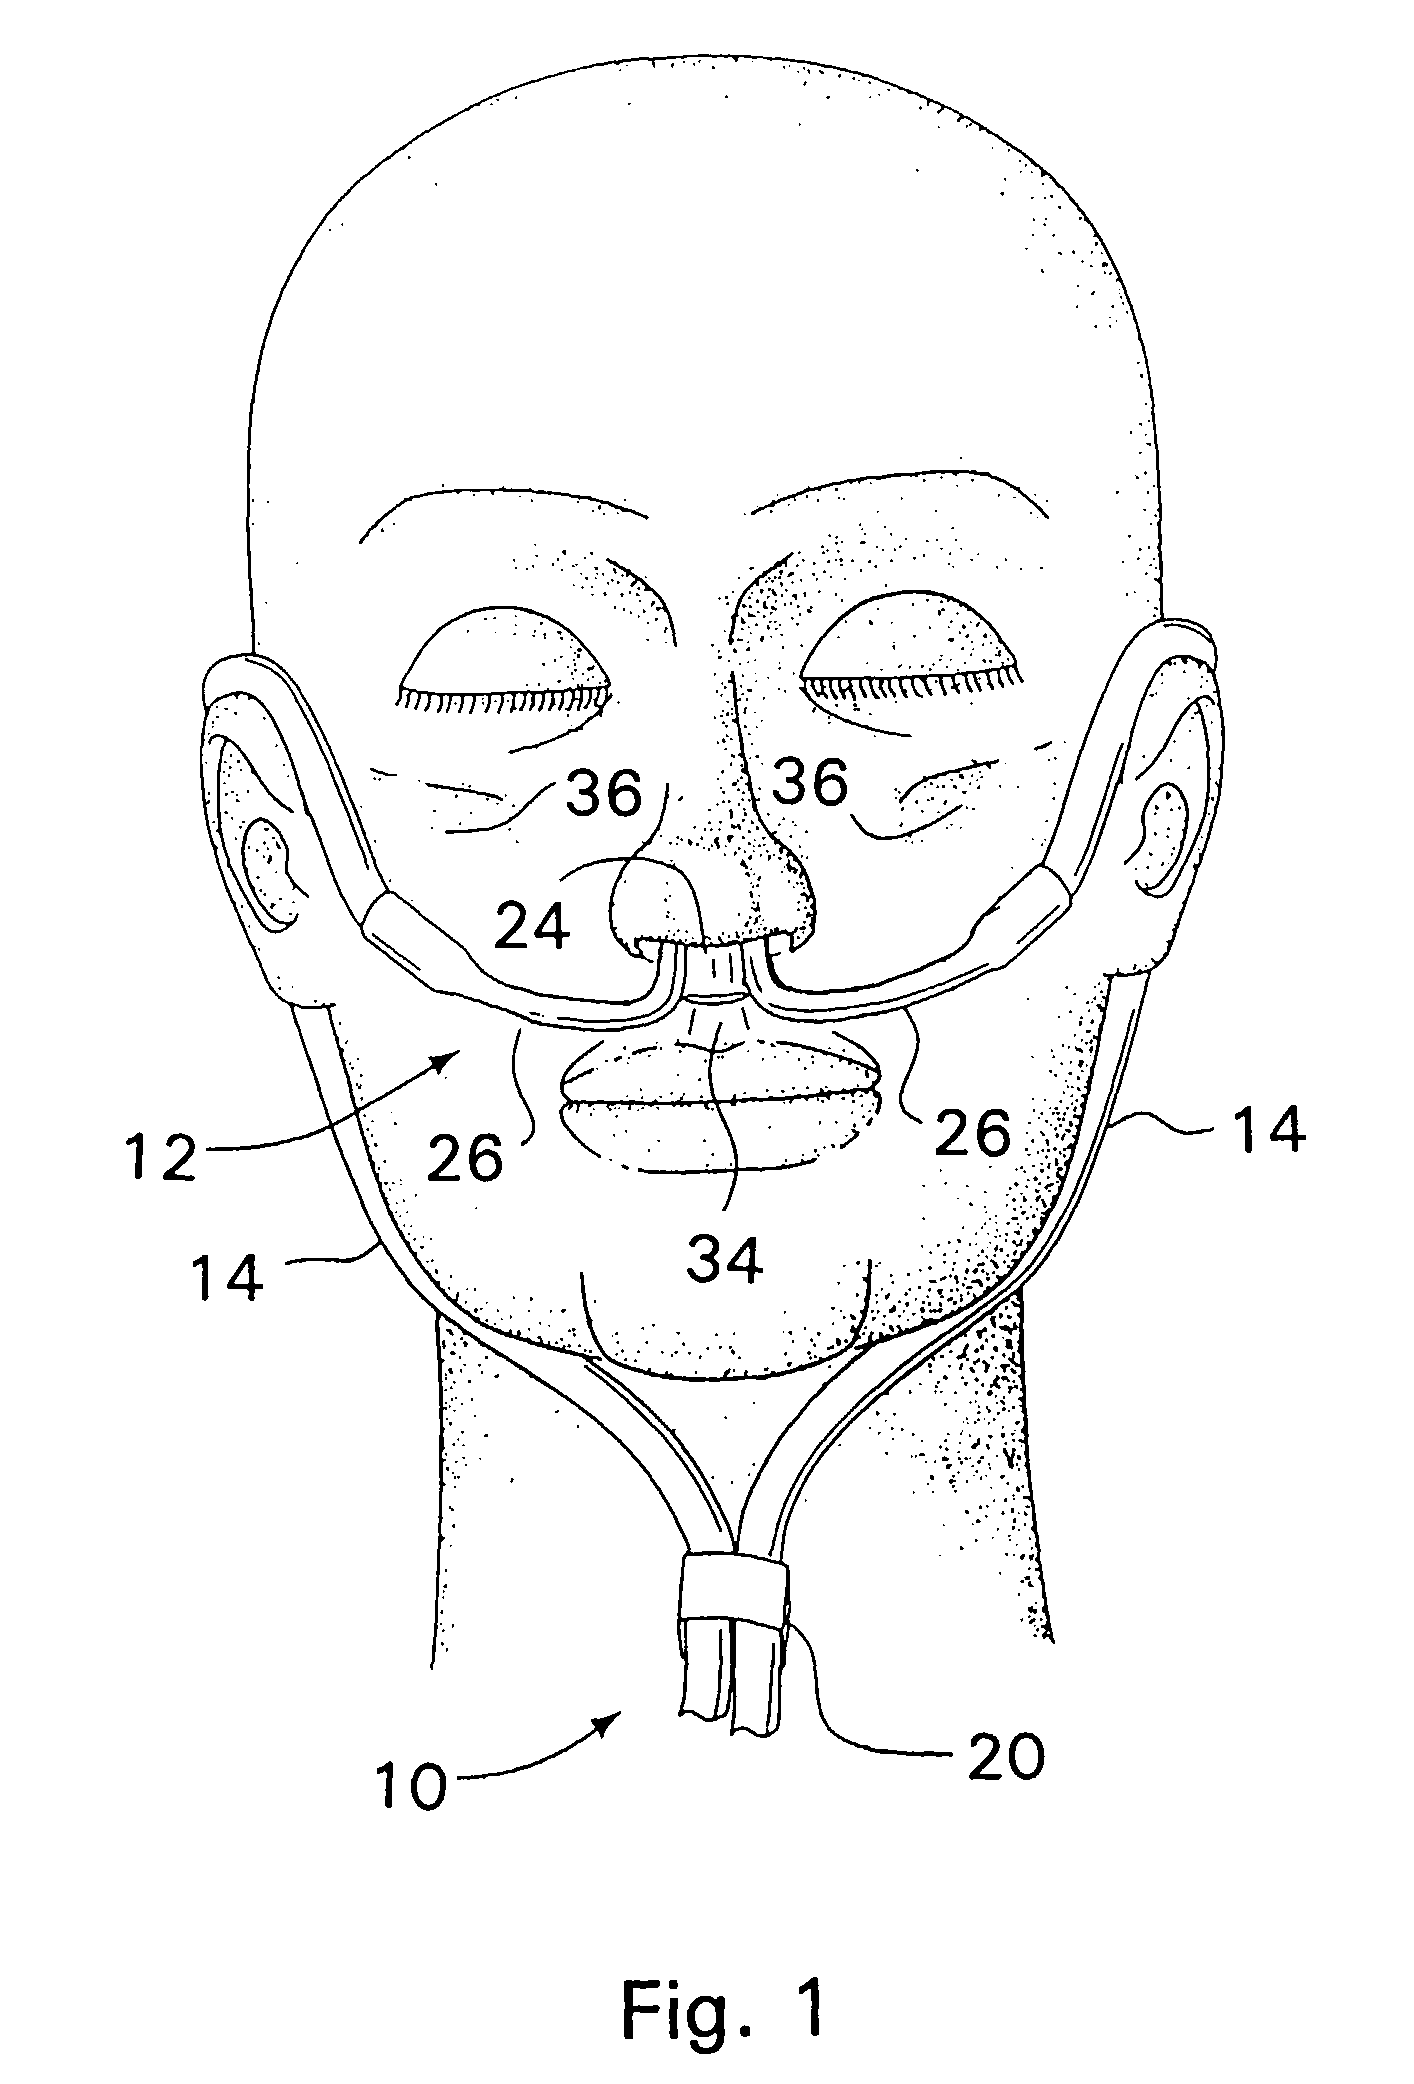 Respiratory therapy system including a nasal cannula assembly